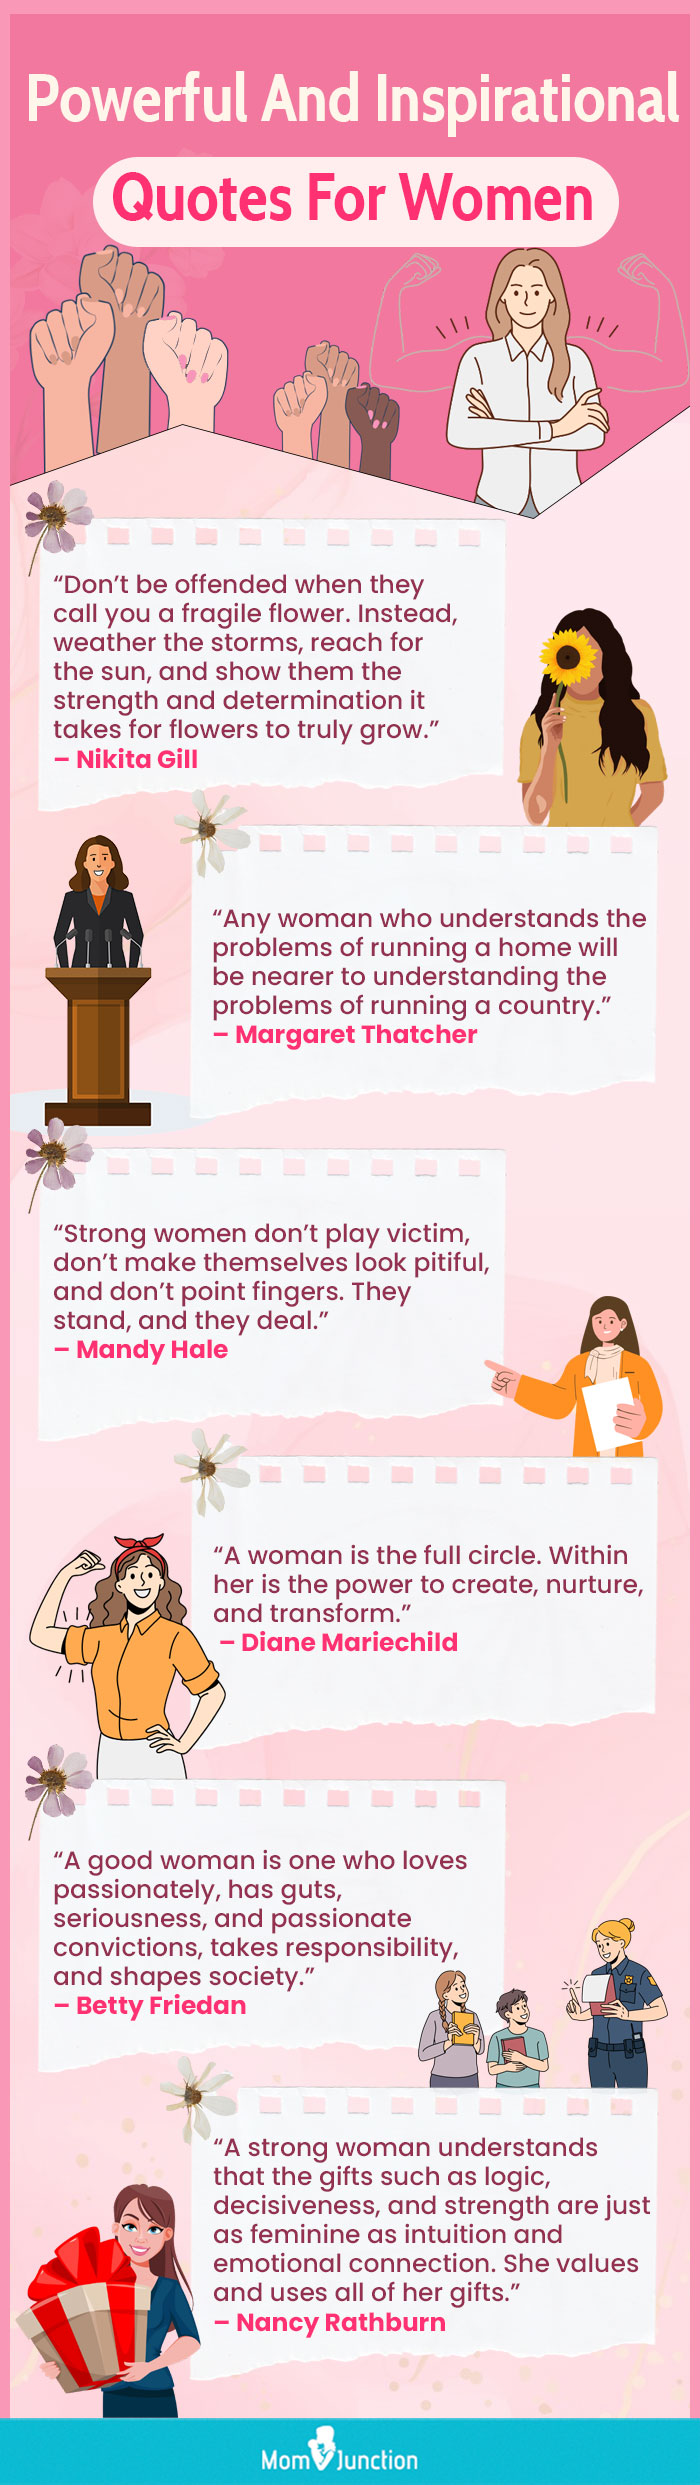 a good woman quotes